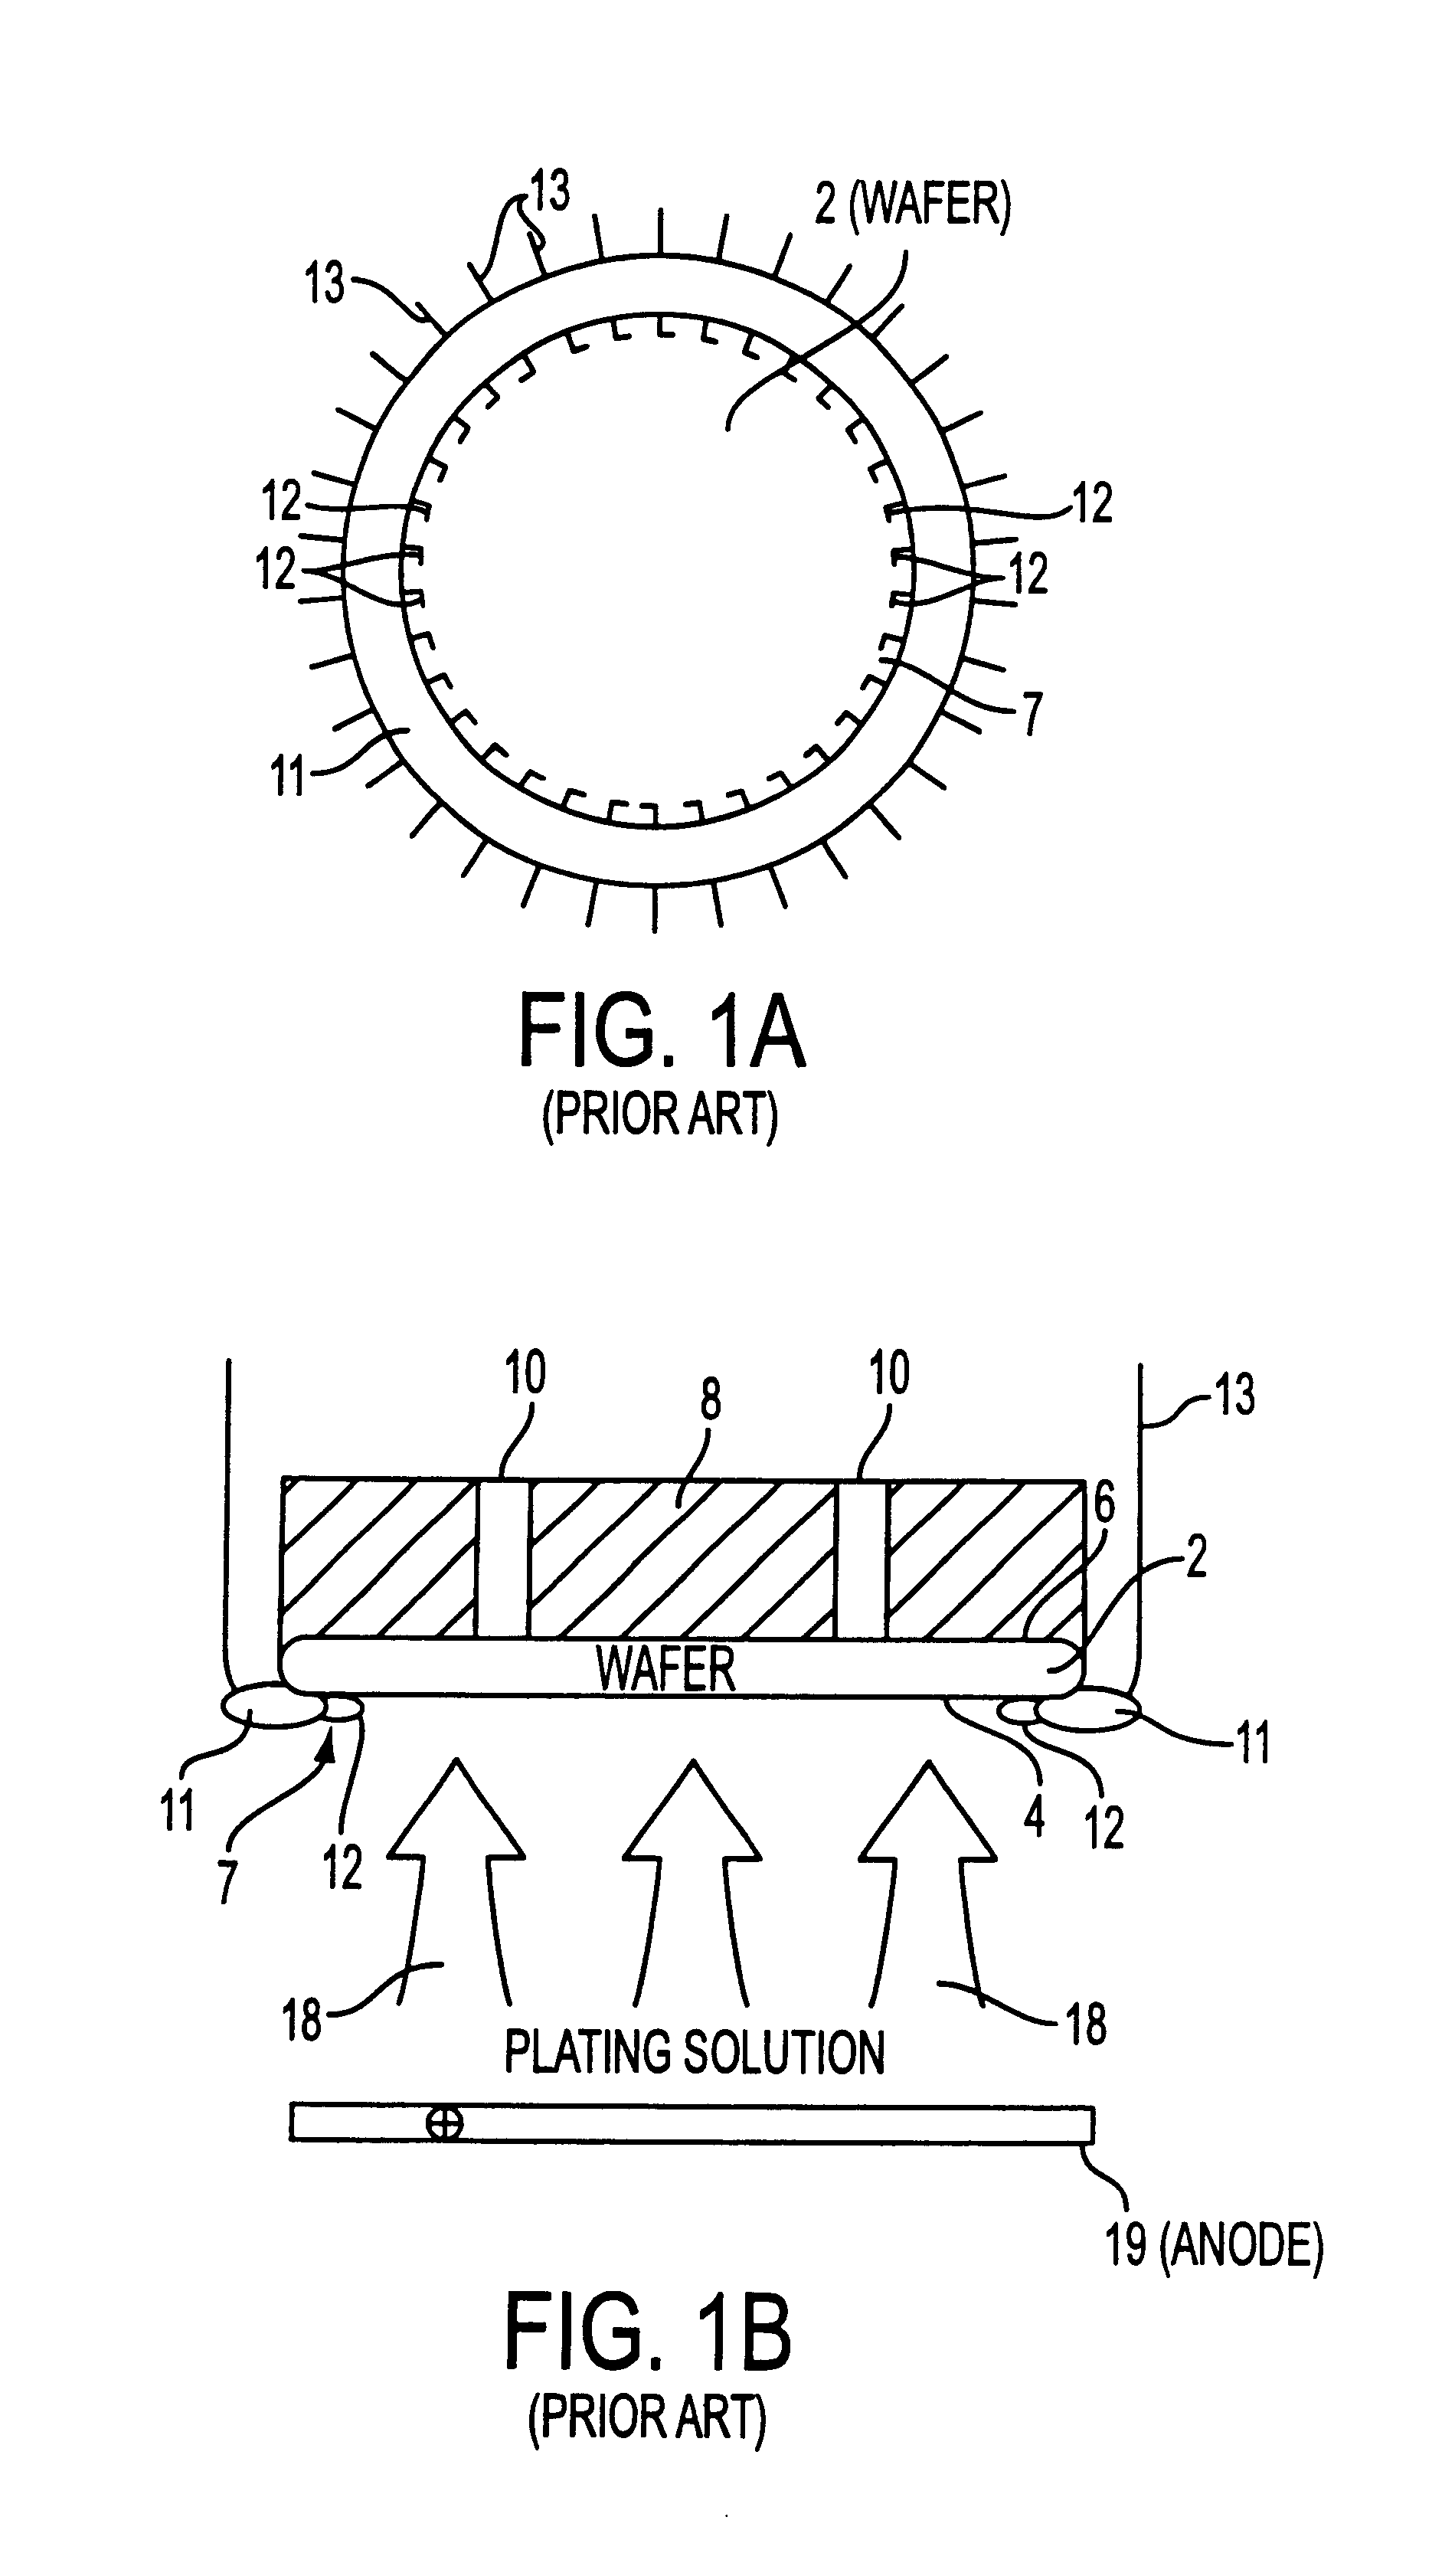 Method and apparatus for forming an electrical contact with a semiconductor substrate